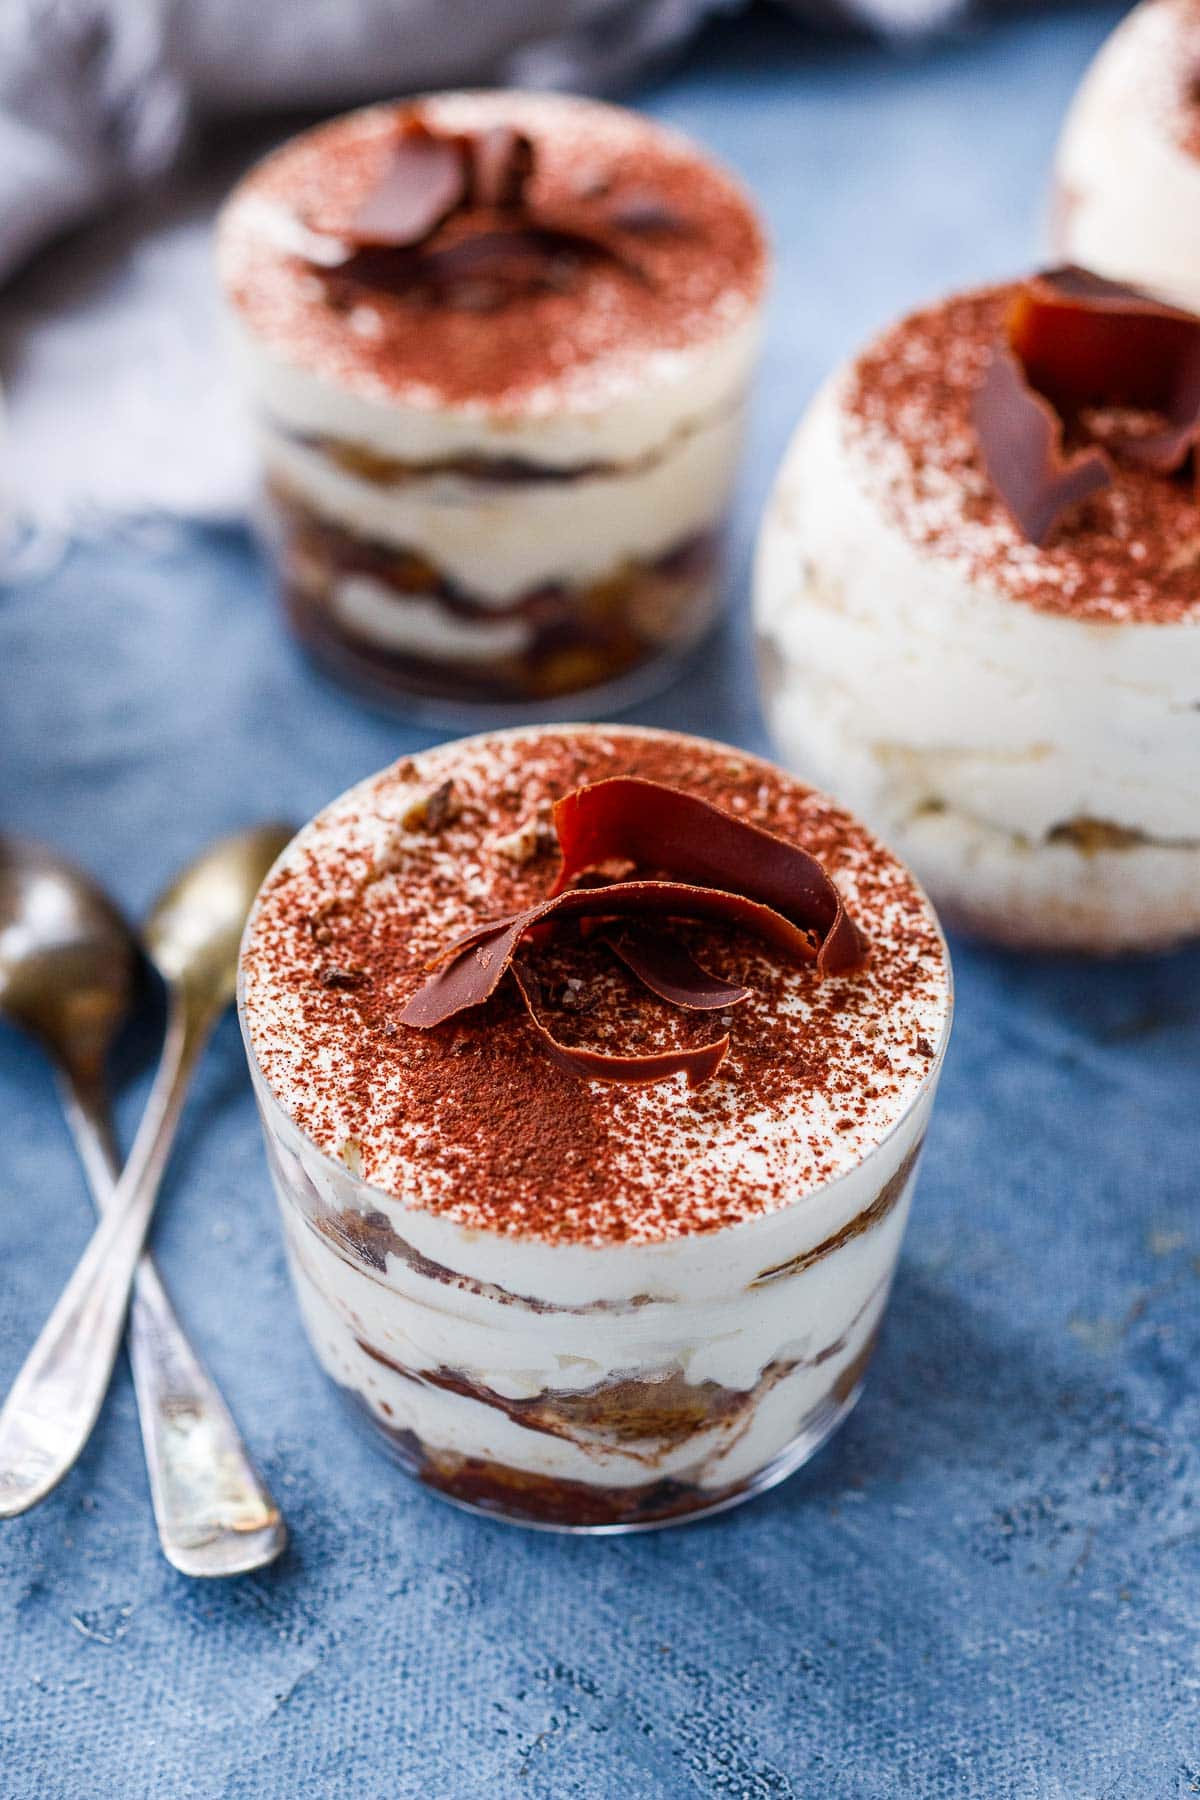 tiramisu in glass jar with cocoa powder dusting on top and a chocolate shaving garnish